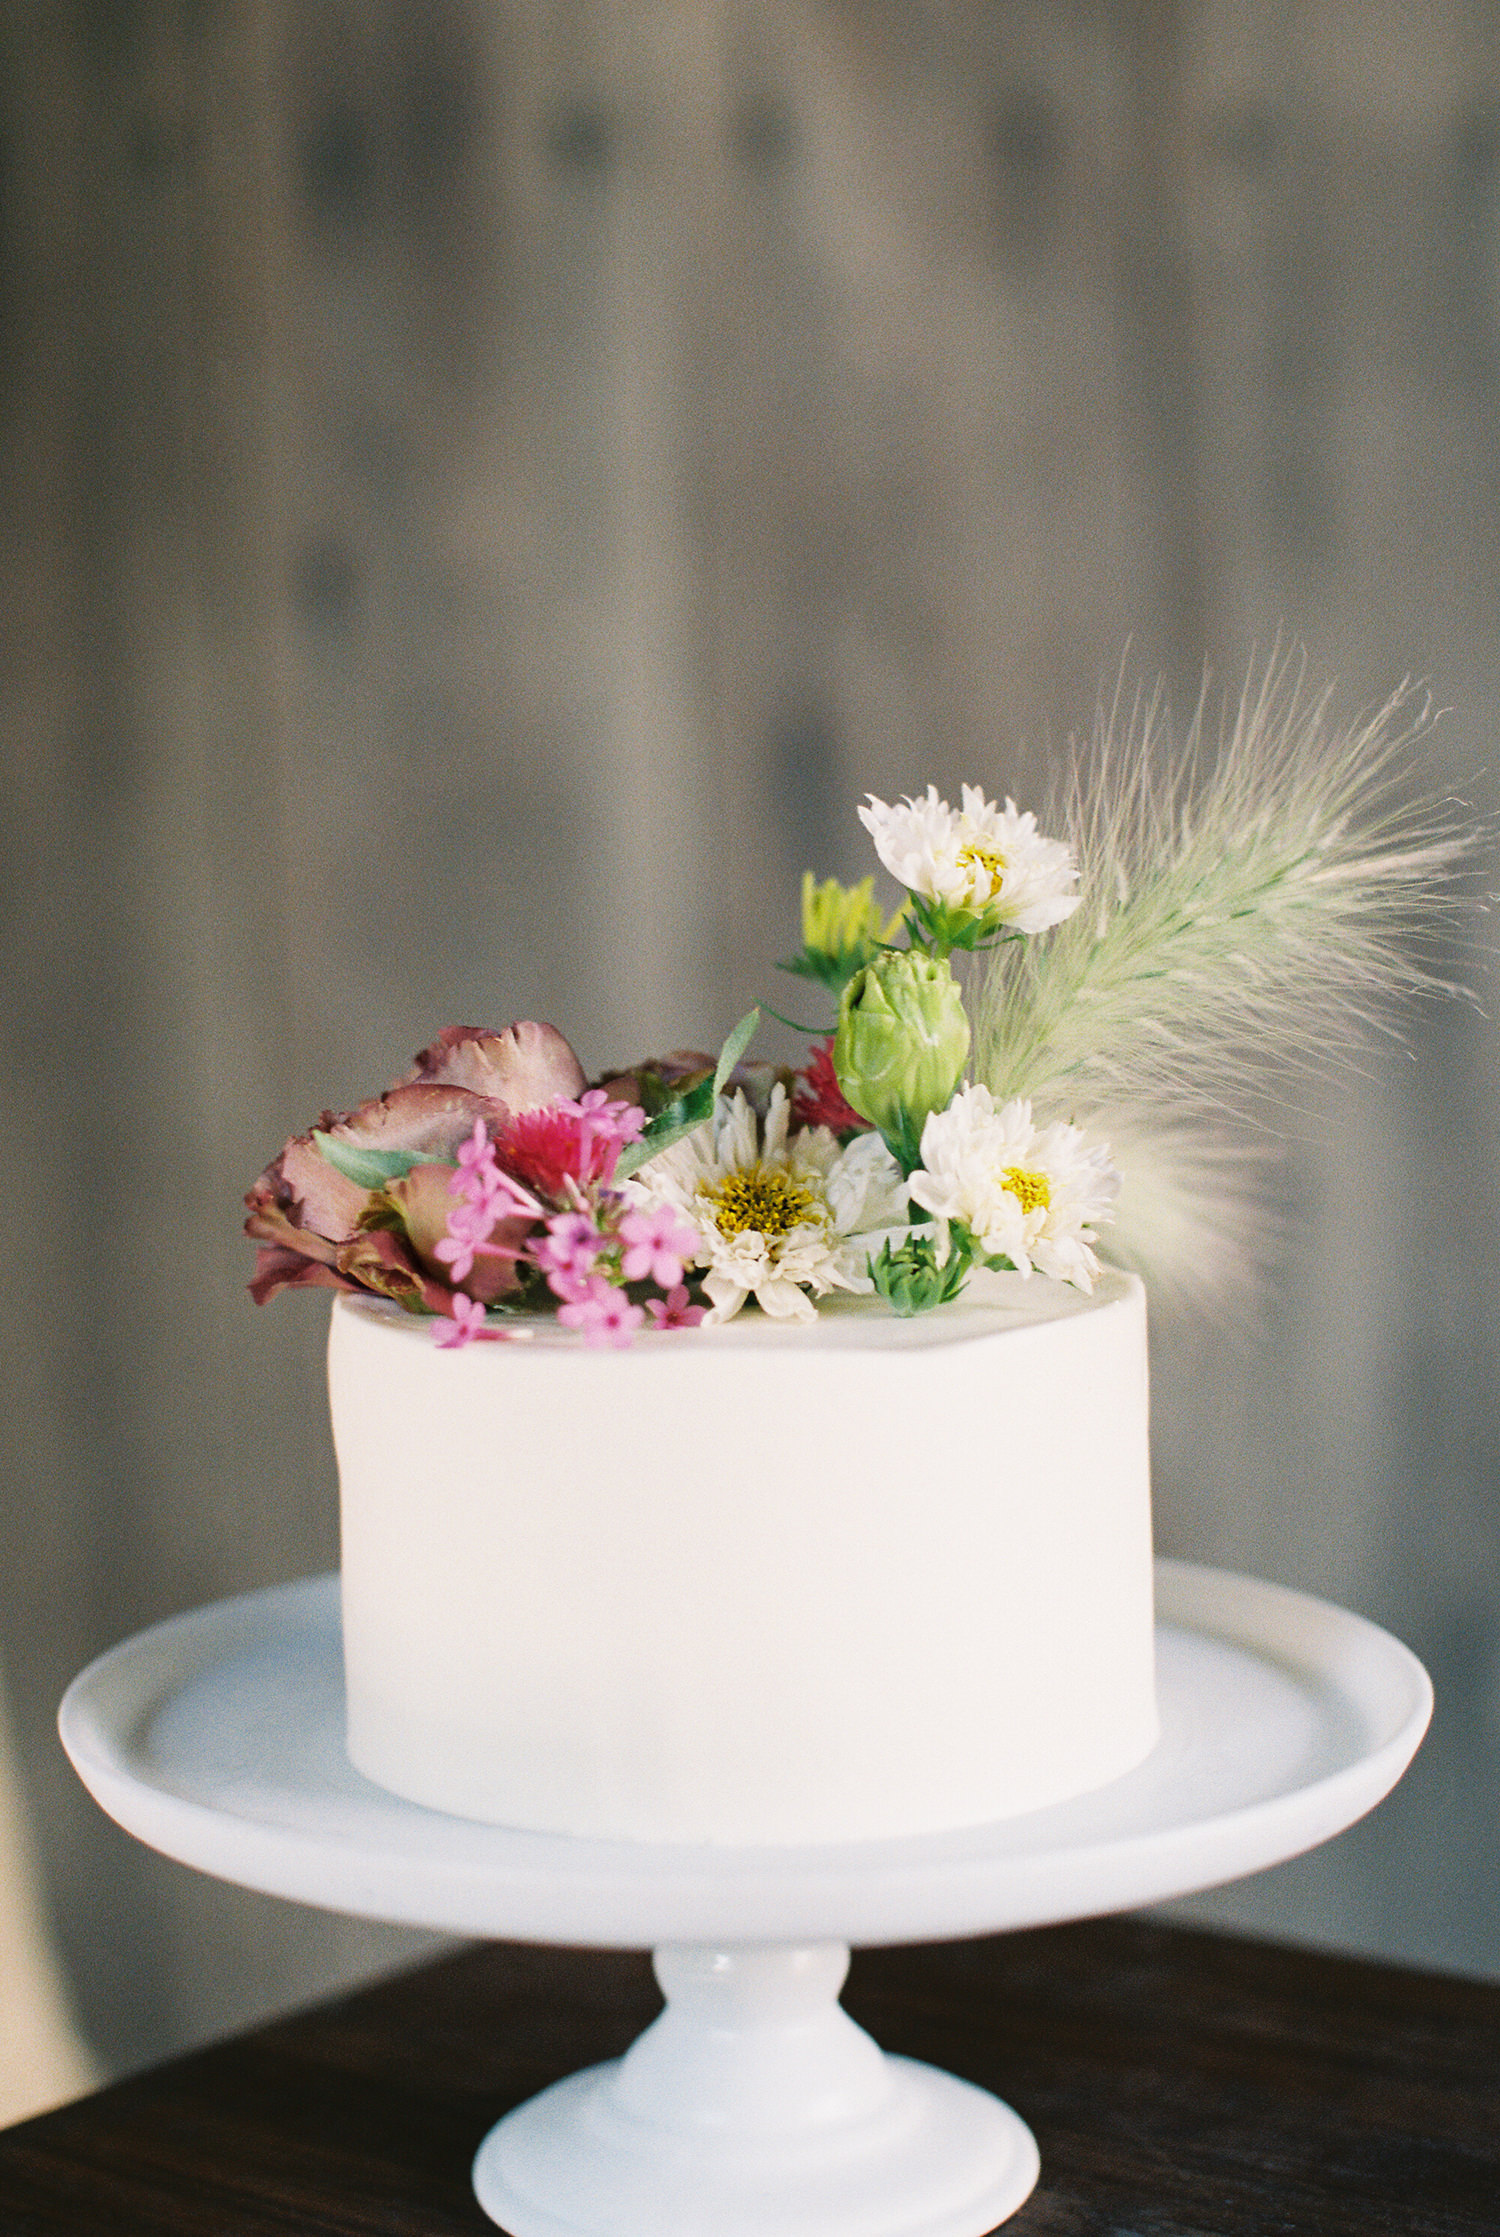 Petit Wedding Cake decorated with flowers at Stone Hill farm | photographed by Mary Dougherty 